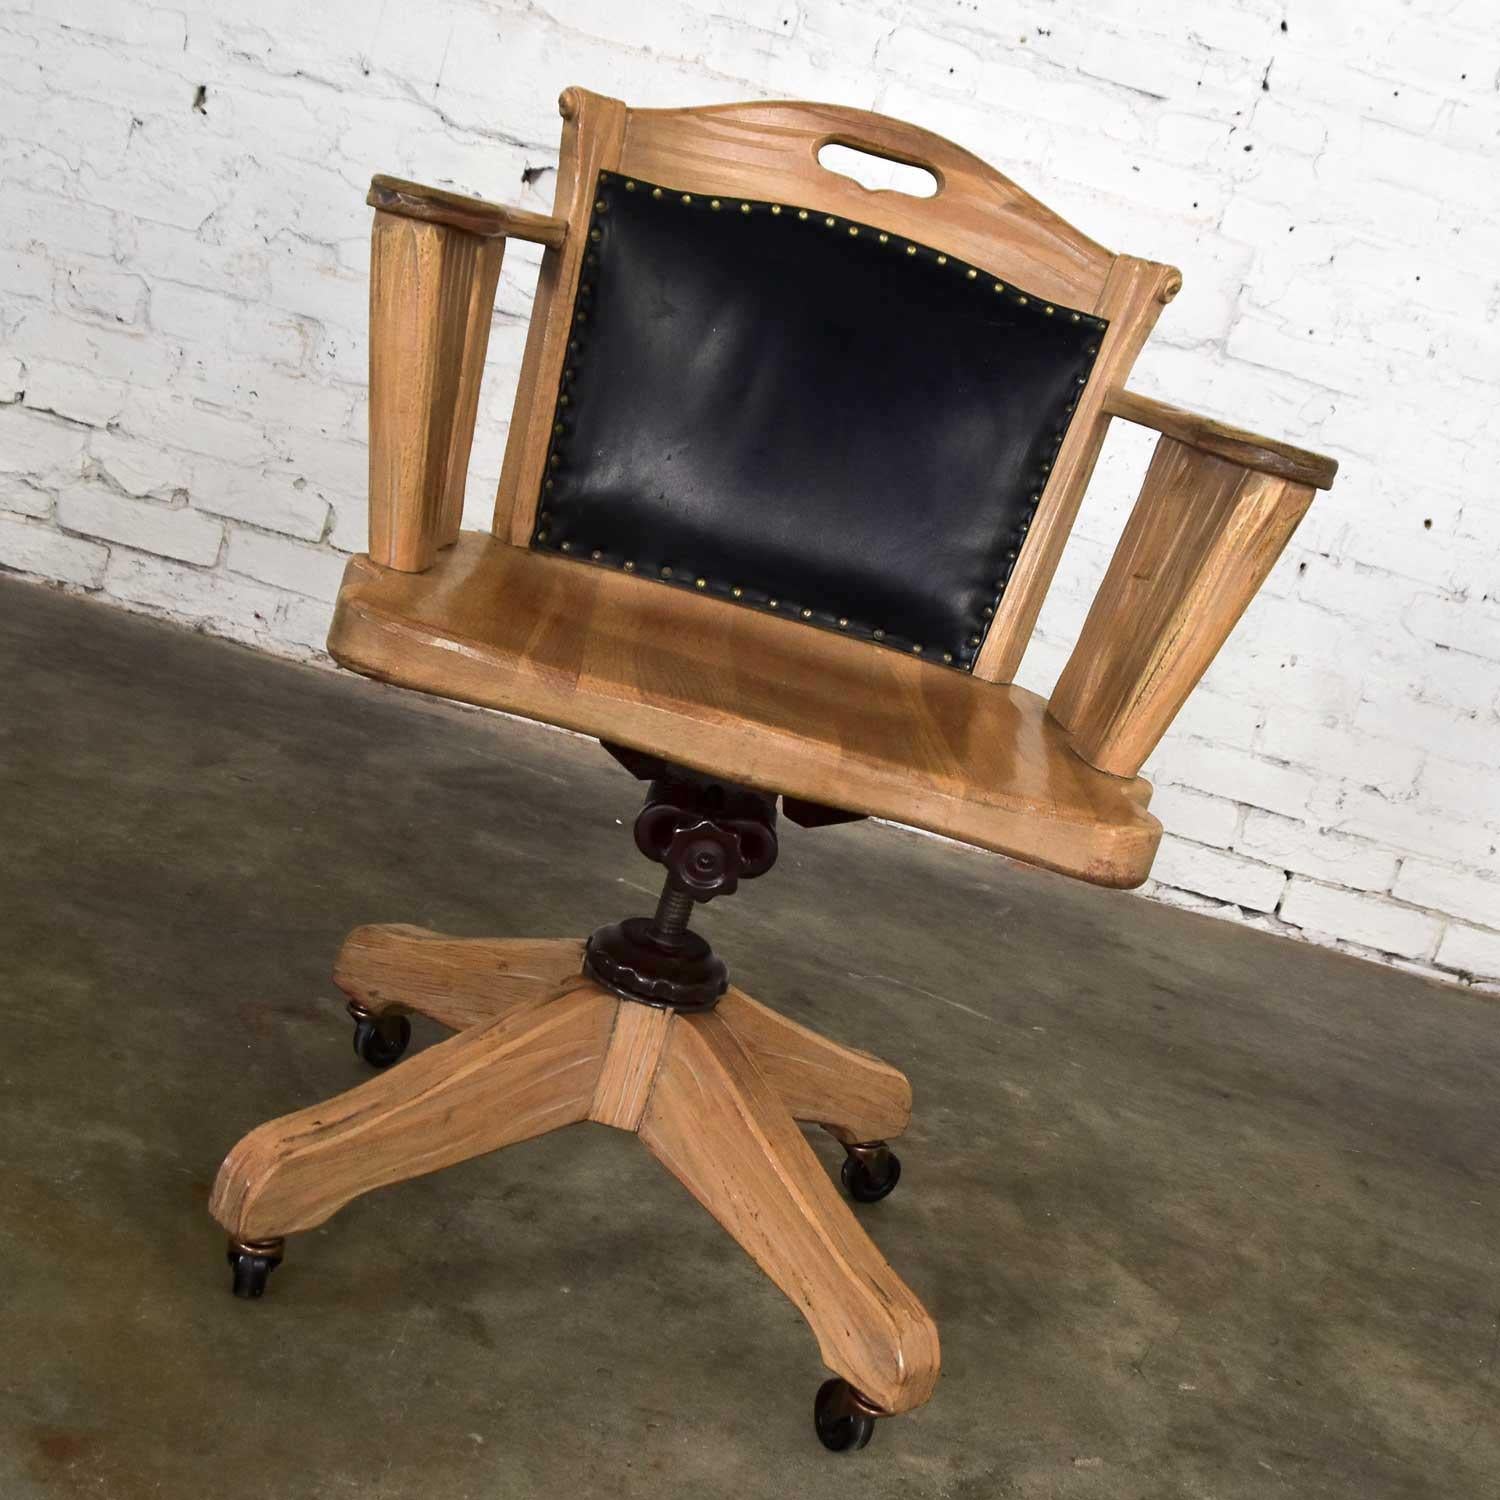 Gorgeous desk chair by A. Brandt comprised of Ranch oak with a honey oak finish, leather back cushion with brass nailhead trim, adjustable painted steel shaft, and rolling casters. Wonderful vintage condition. The casters and sockets have been